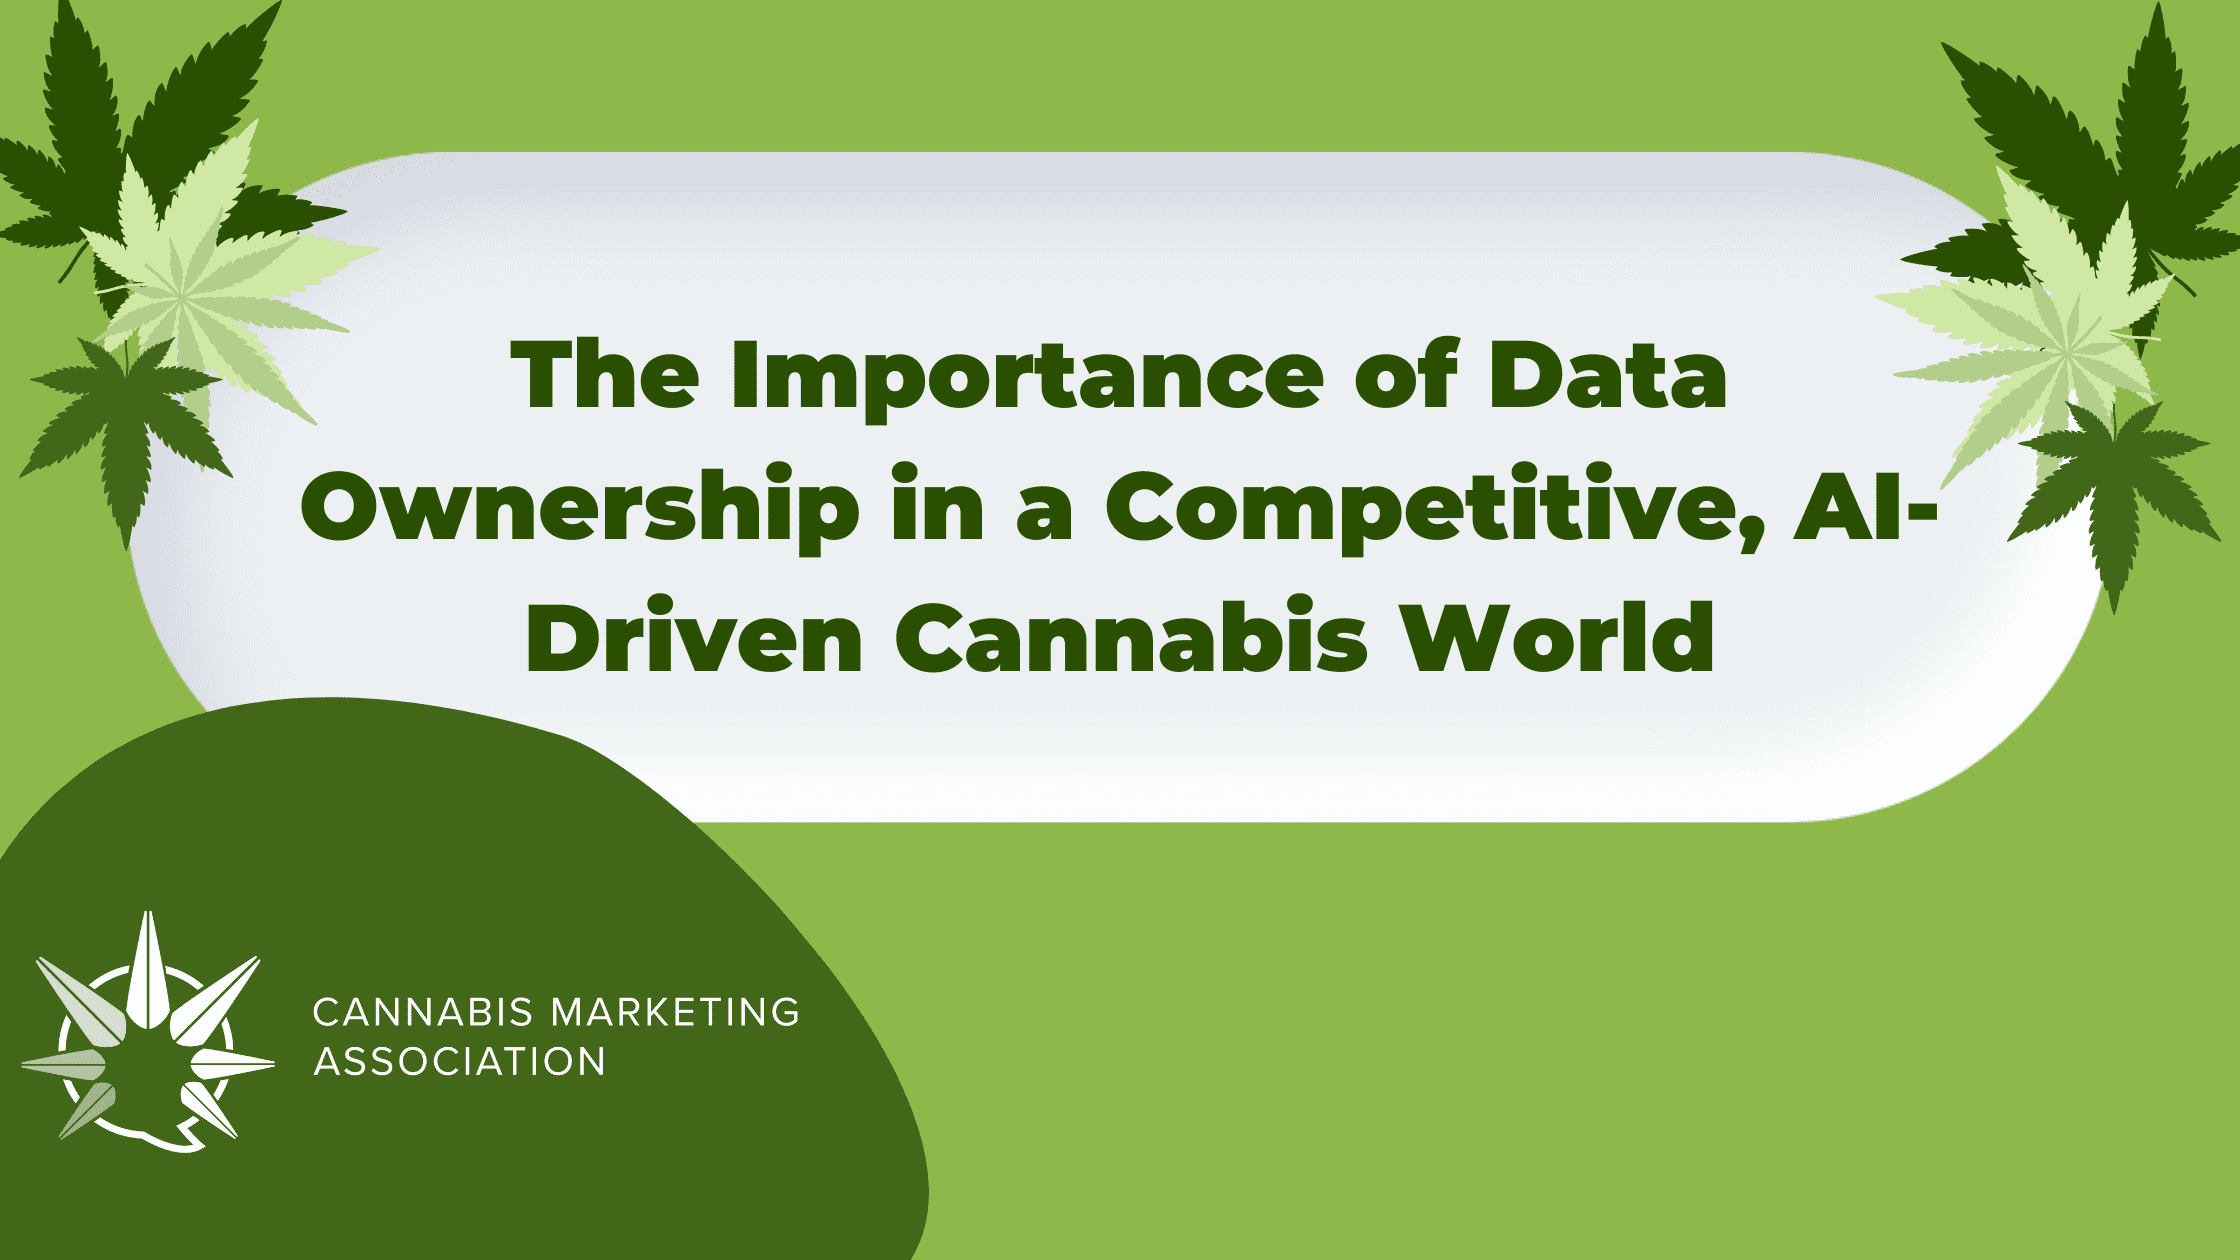 The Importance of Data Ownership in a Competitive, AI-Driven Cannabis World